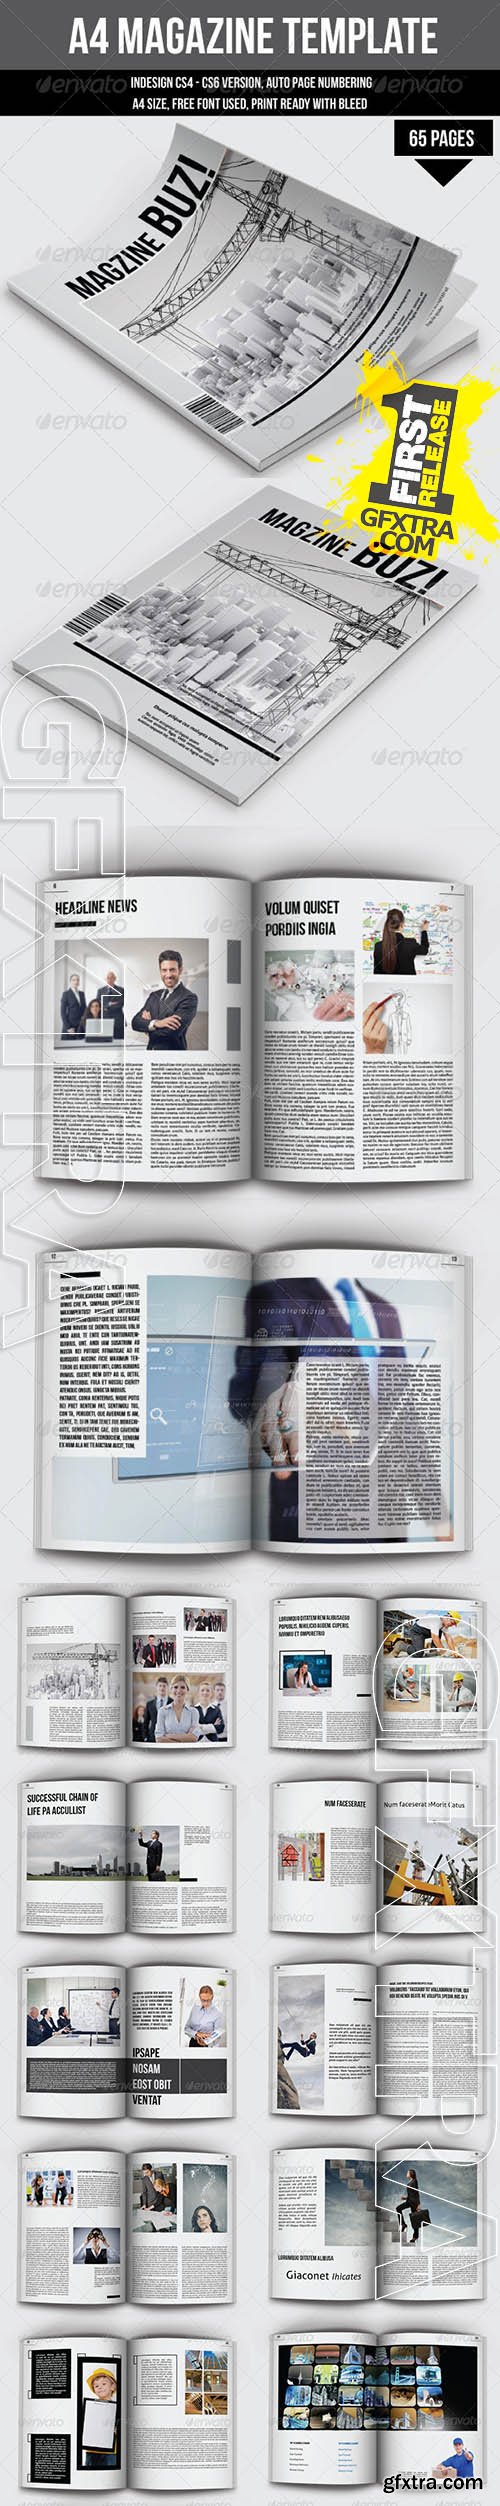 65 Pages Magazine Template - Graphicriver 6778234